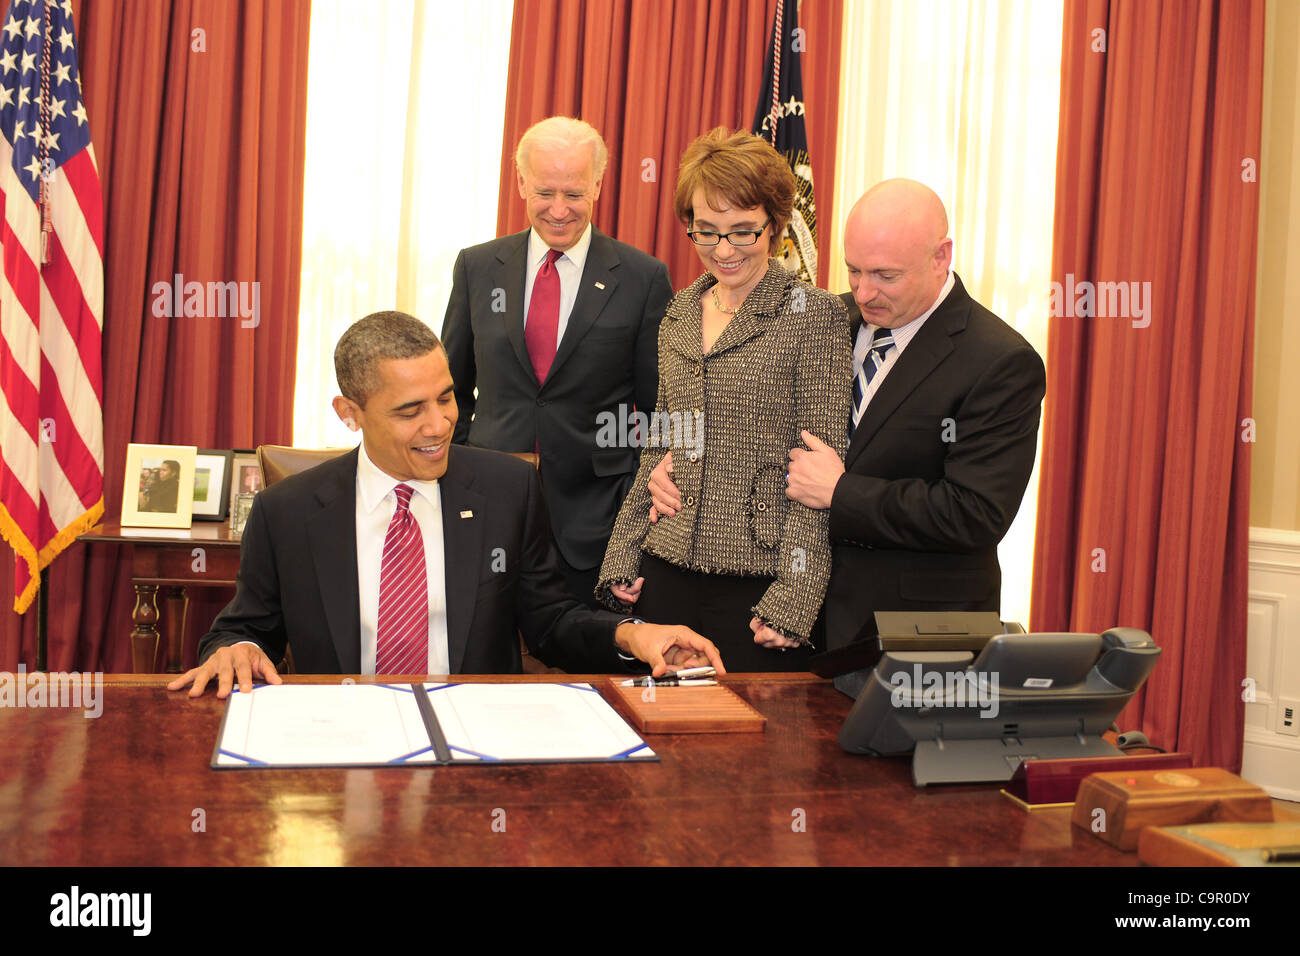 Feb. 10, 2012 - Washington, District of Columbia, U.S. - The President  signs H.R. 3801, the Ultralight Aircraft Smuggling Prevention Act of 2012. This bill is the last piece of legislation that former Representative Gabrielle Giffords sponsored and voted on in the U.S. House of Representatives. The Stock Photo